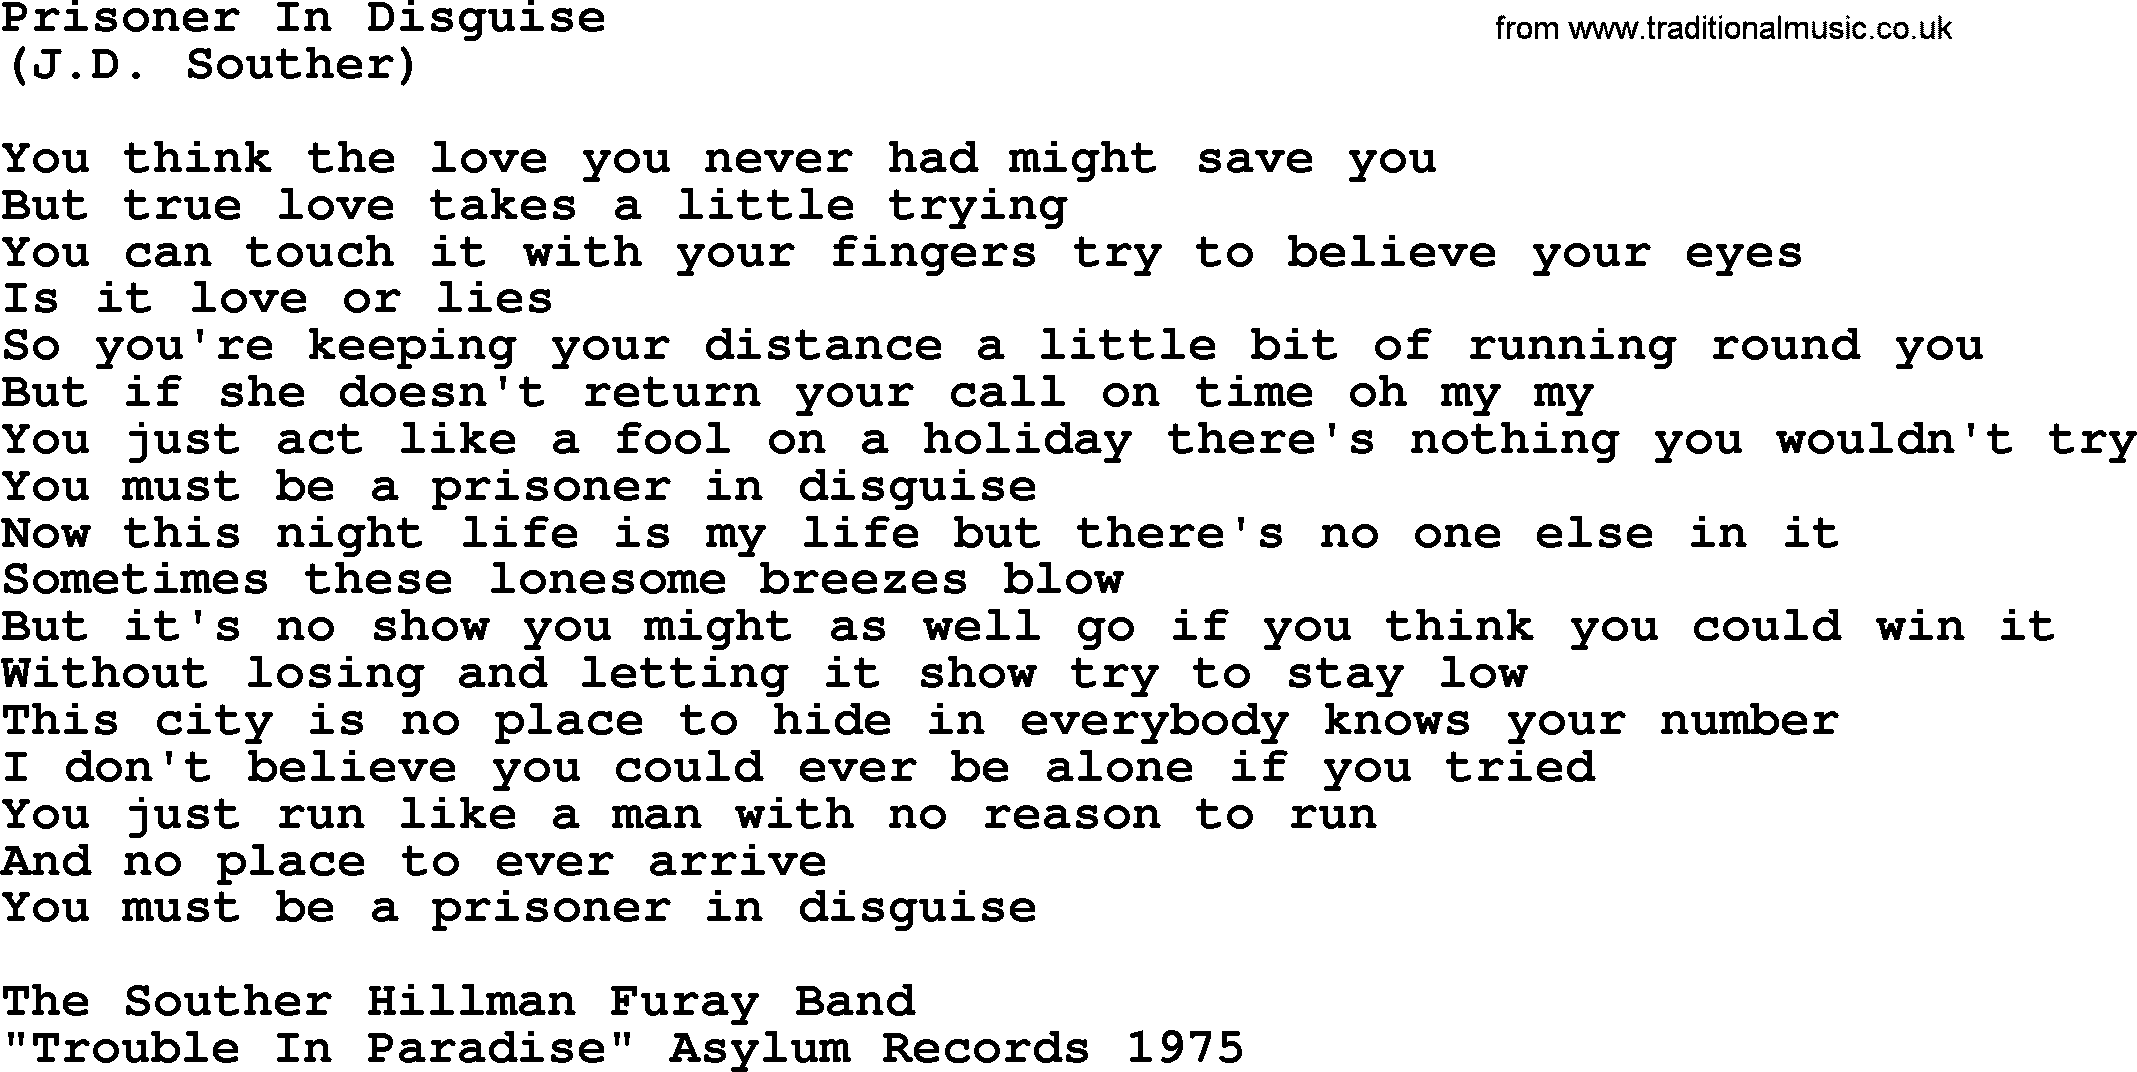 The Byrds song Prisoner In Disguise, lyrics